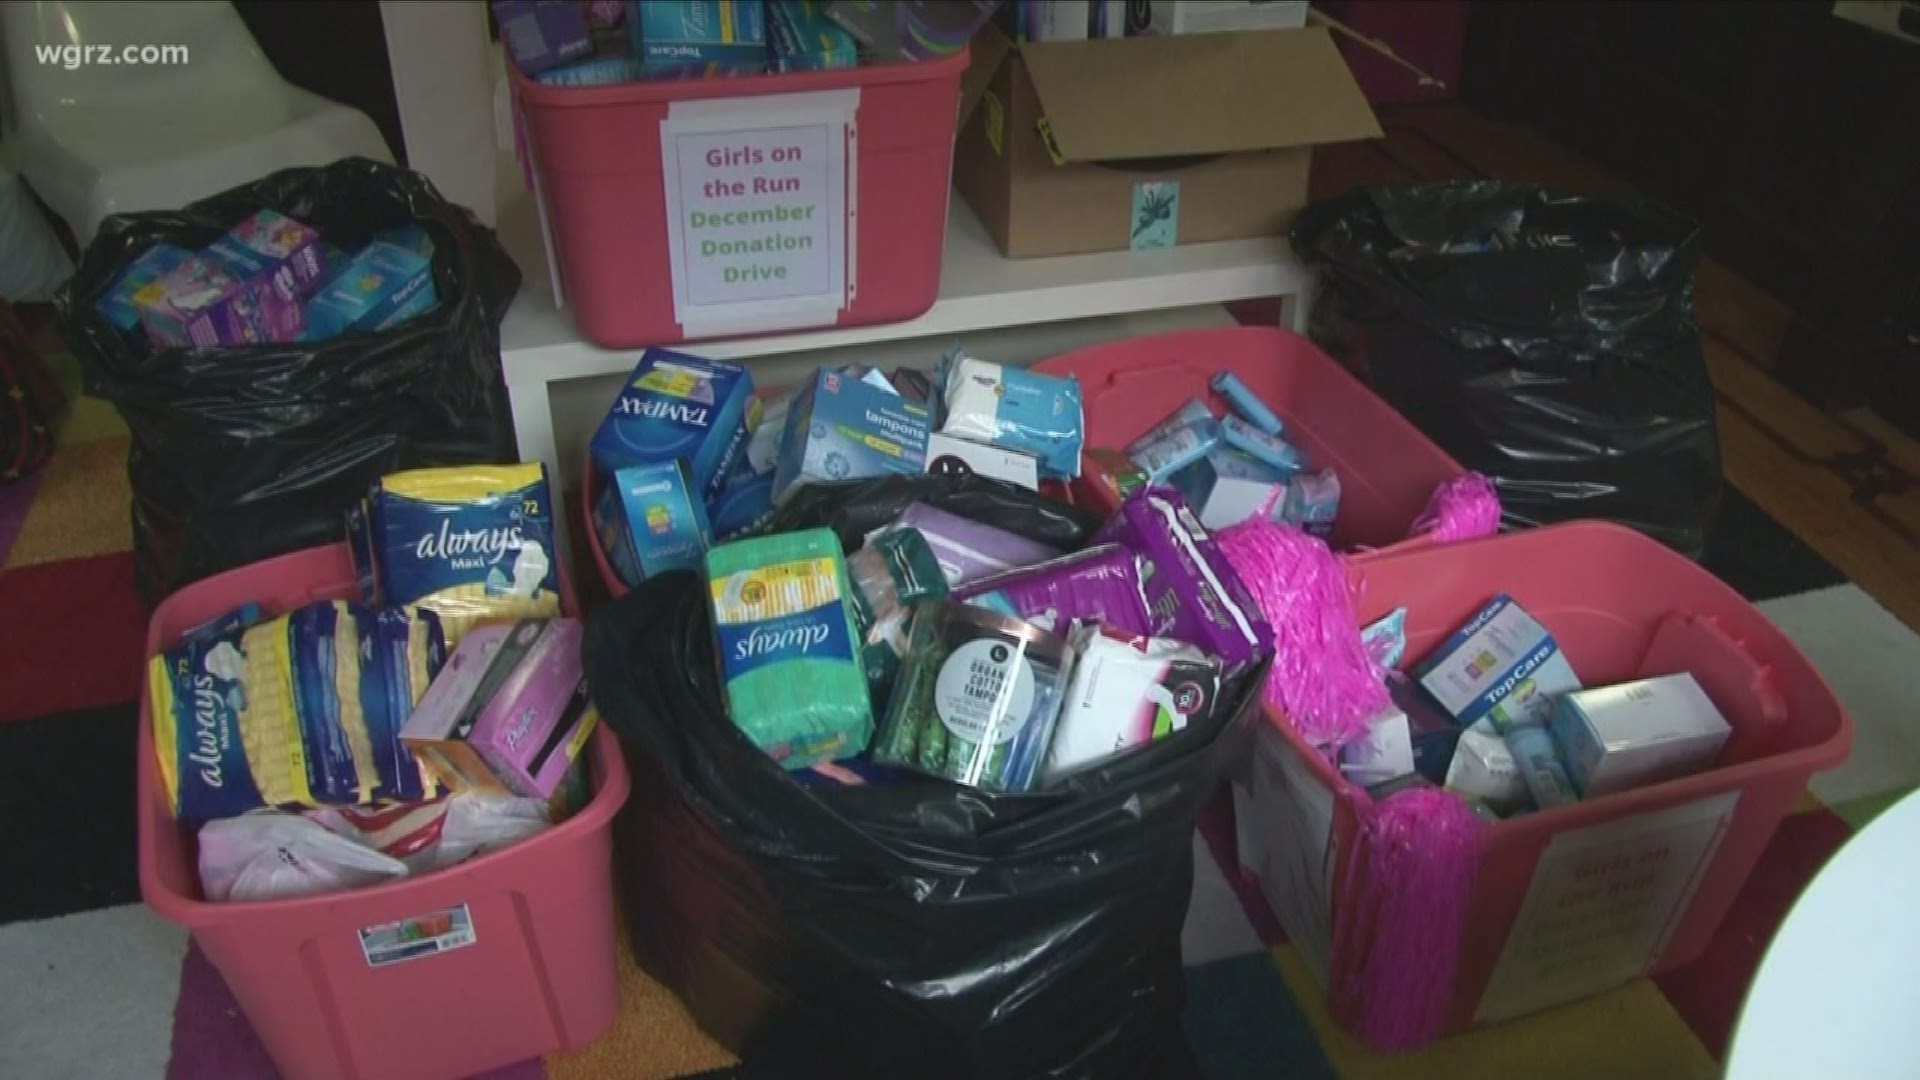 We started off with just three small pink bins, and they just started overflowing. So we ended up with all of this."